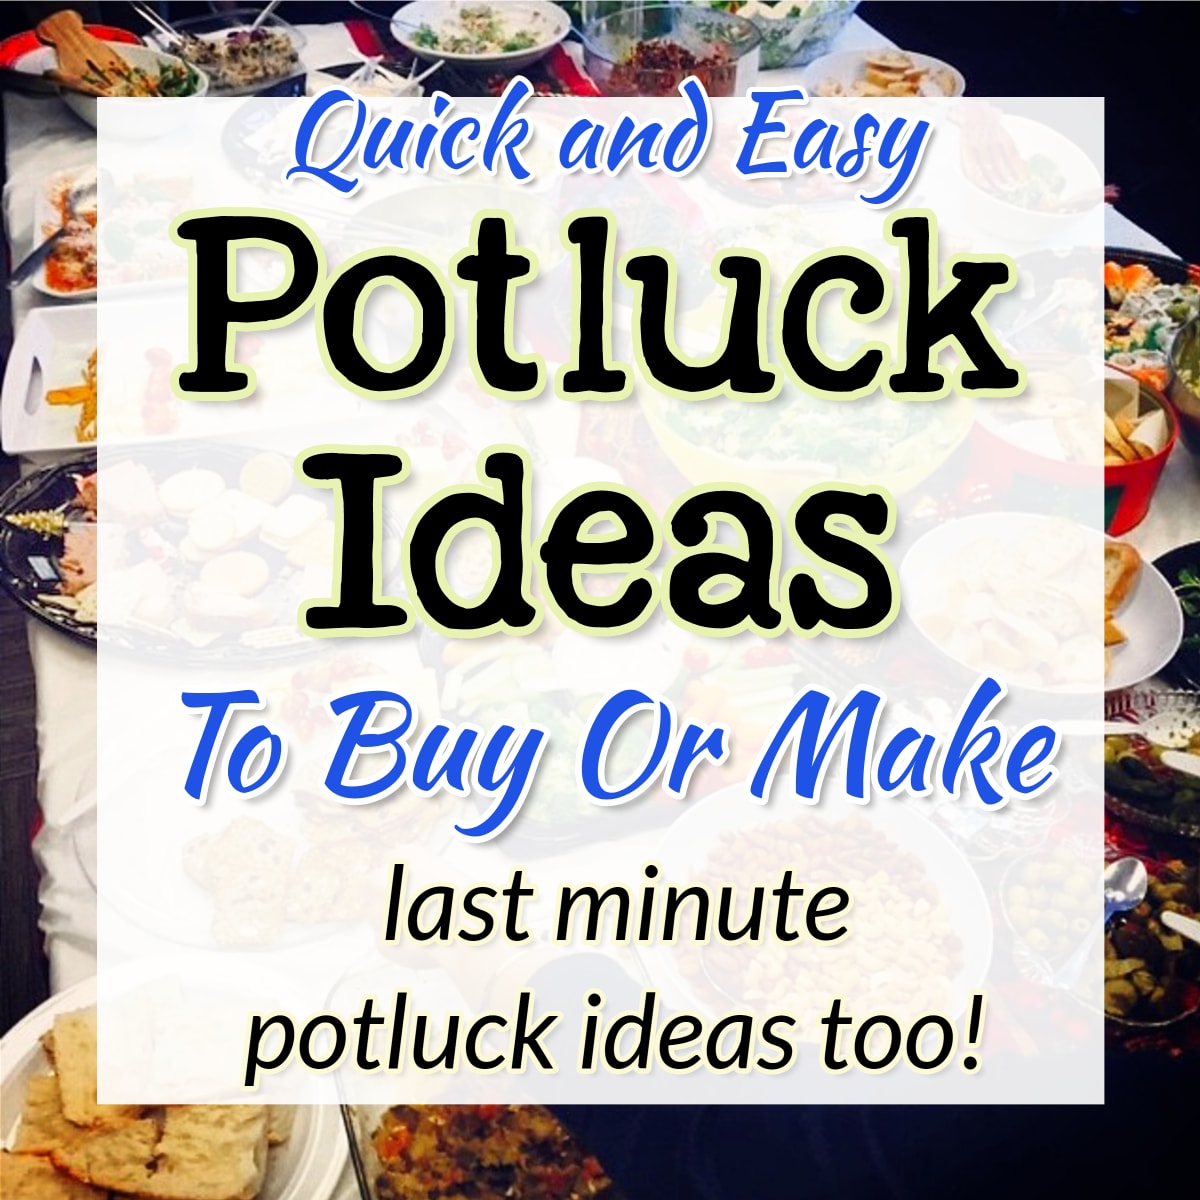 Potluck Ideas - Last minute potluck ideas to buy or make for breakfast, brunch or office potluck. Lots of cheap potluck food ideas including pasta salad main dishes, sides and appetizers